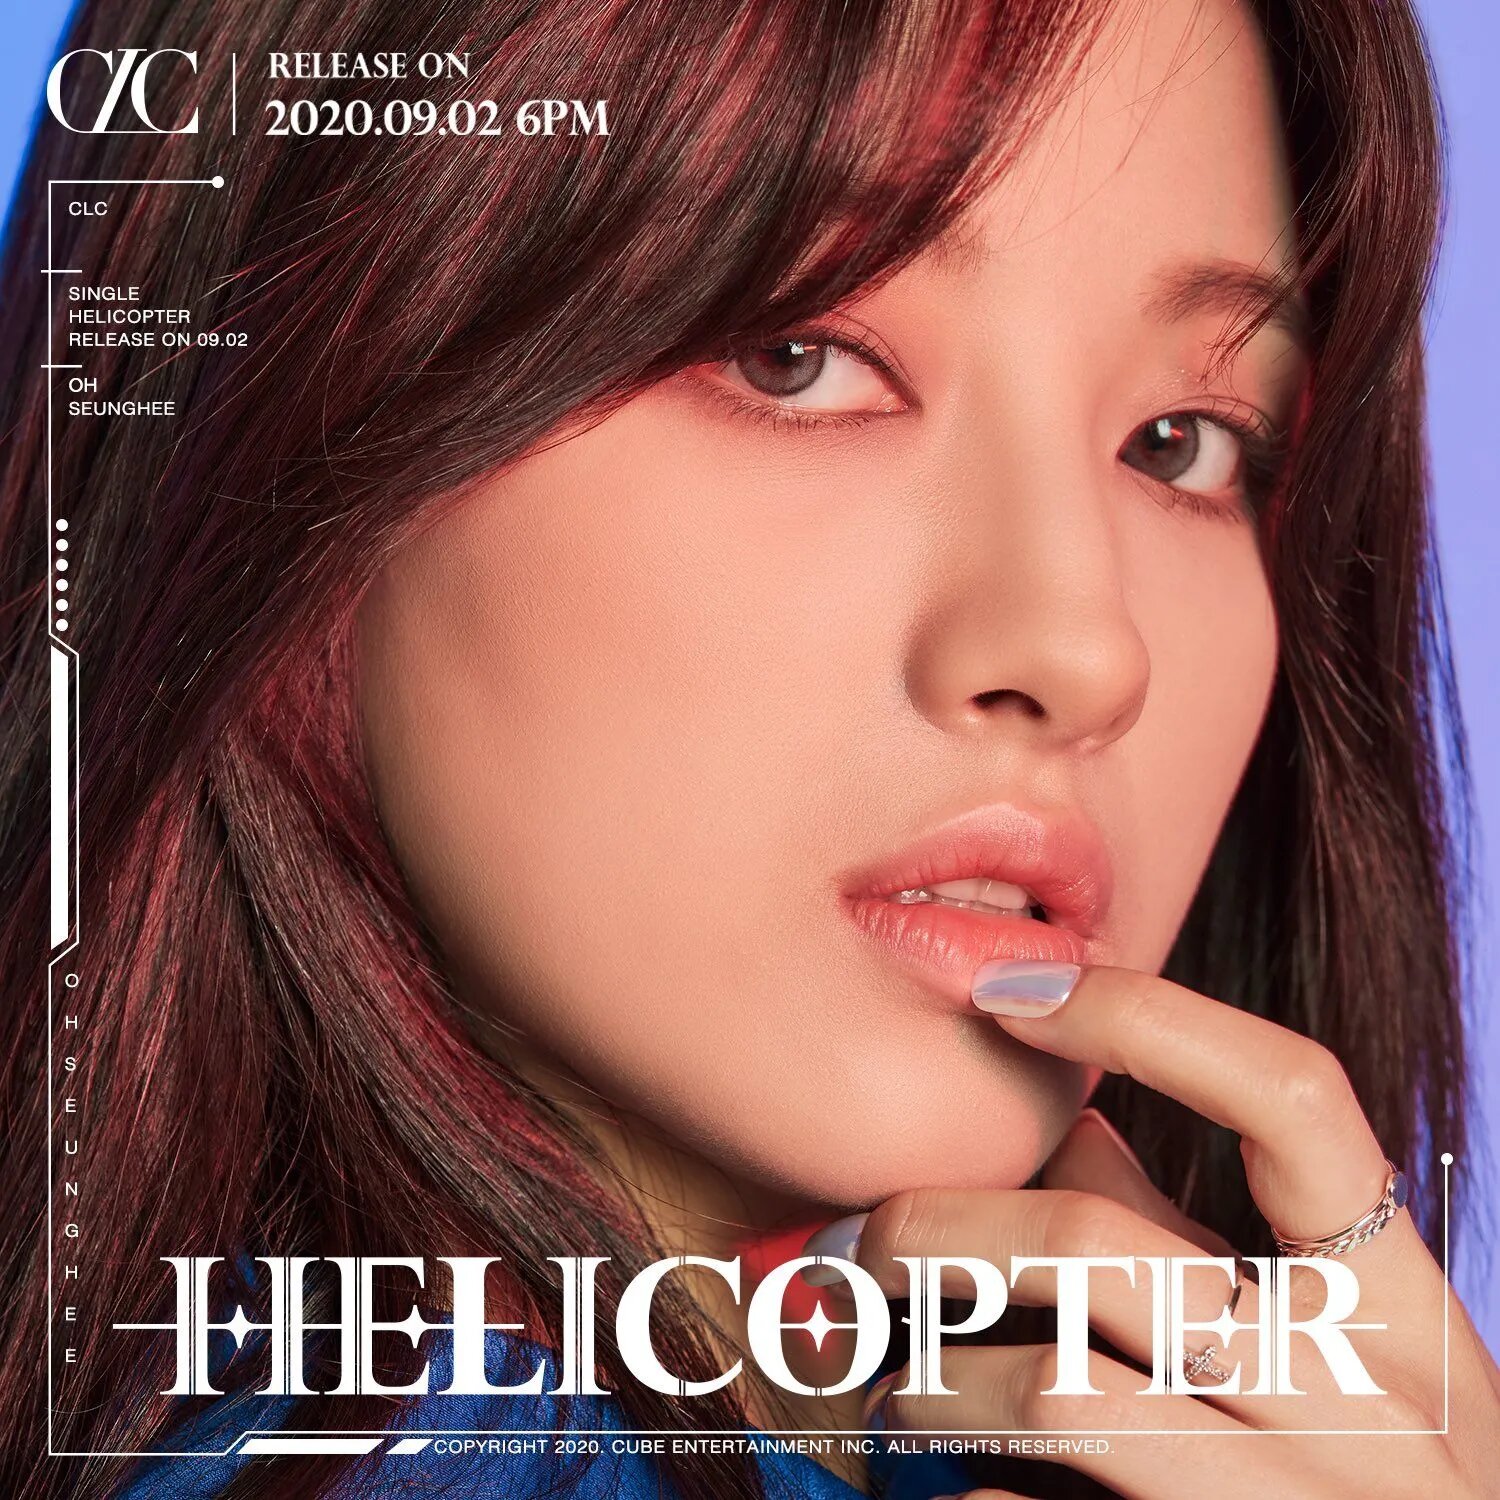 CLC 'HELICOPTER' Concept Teasers | kpopping